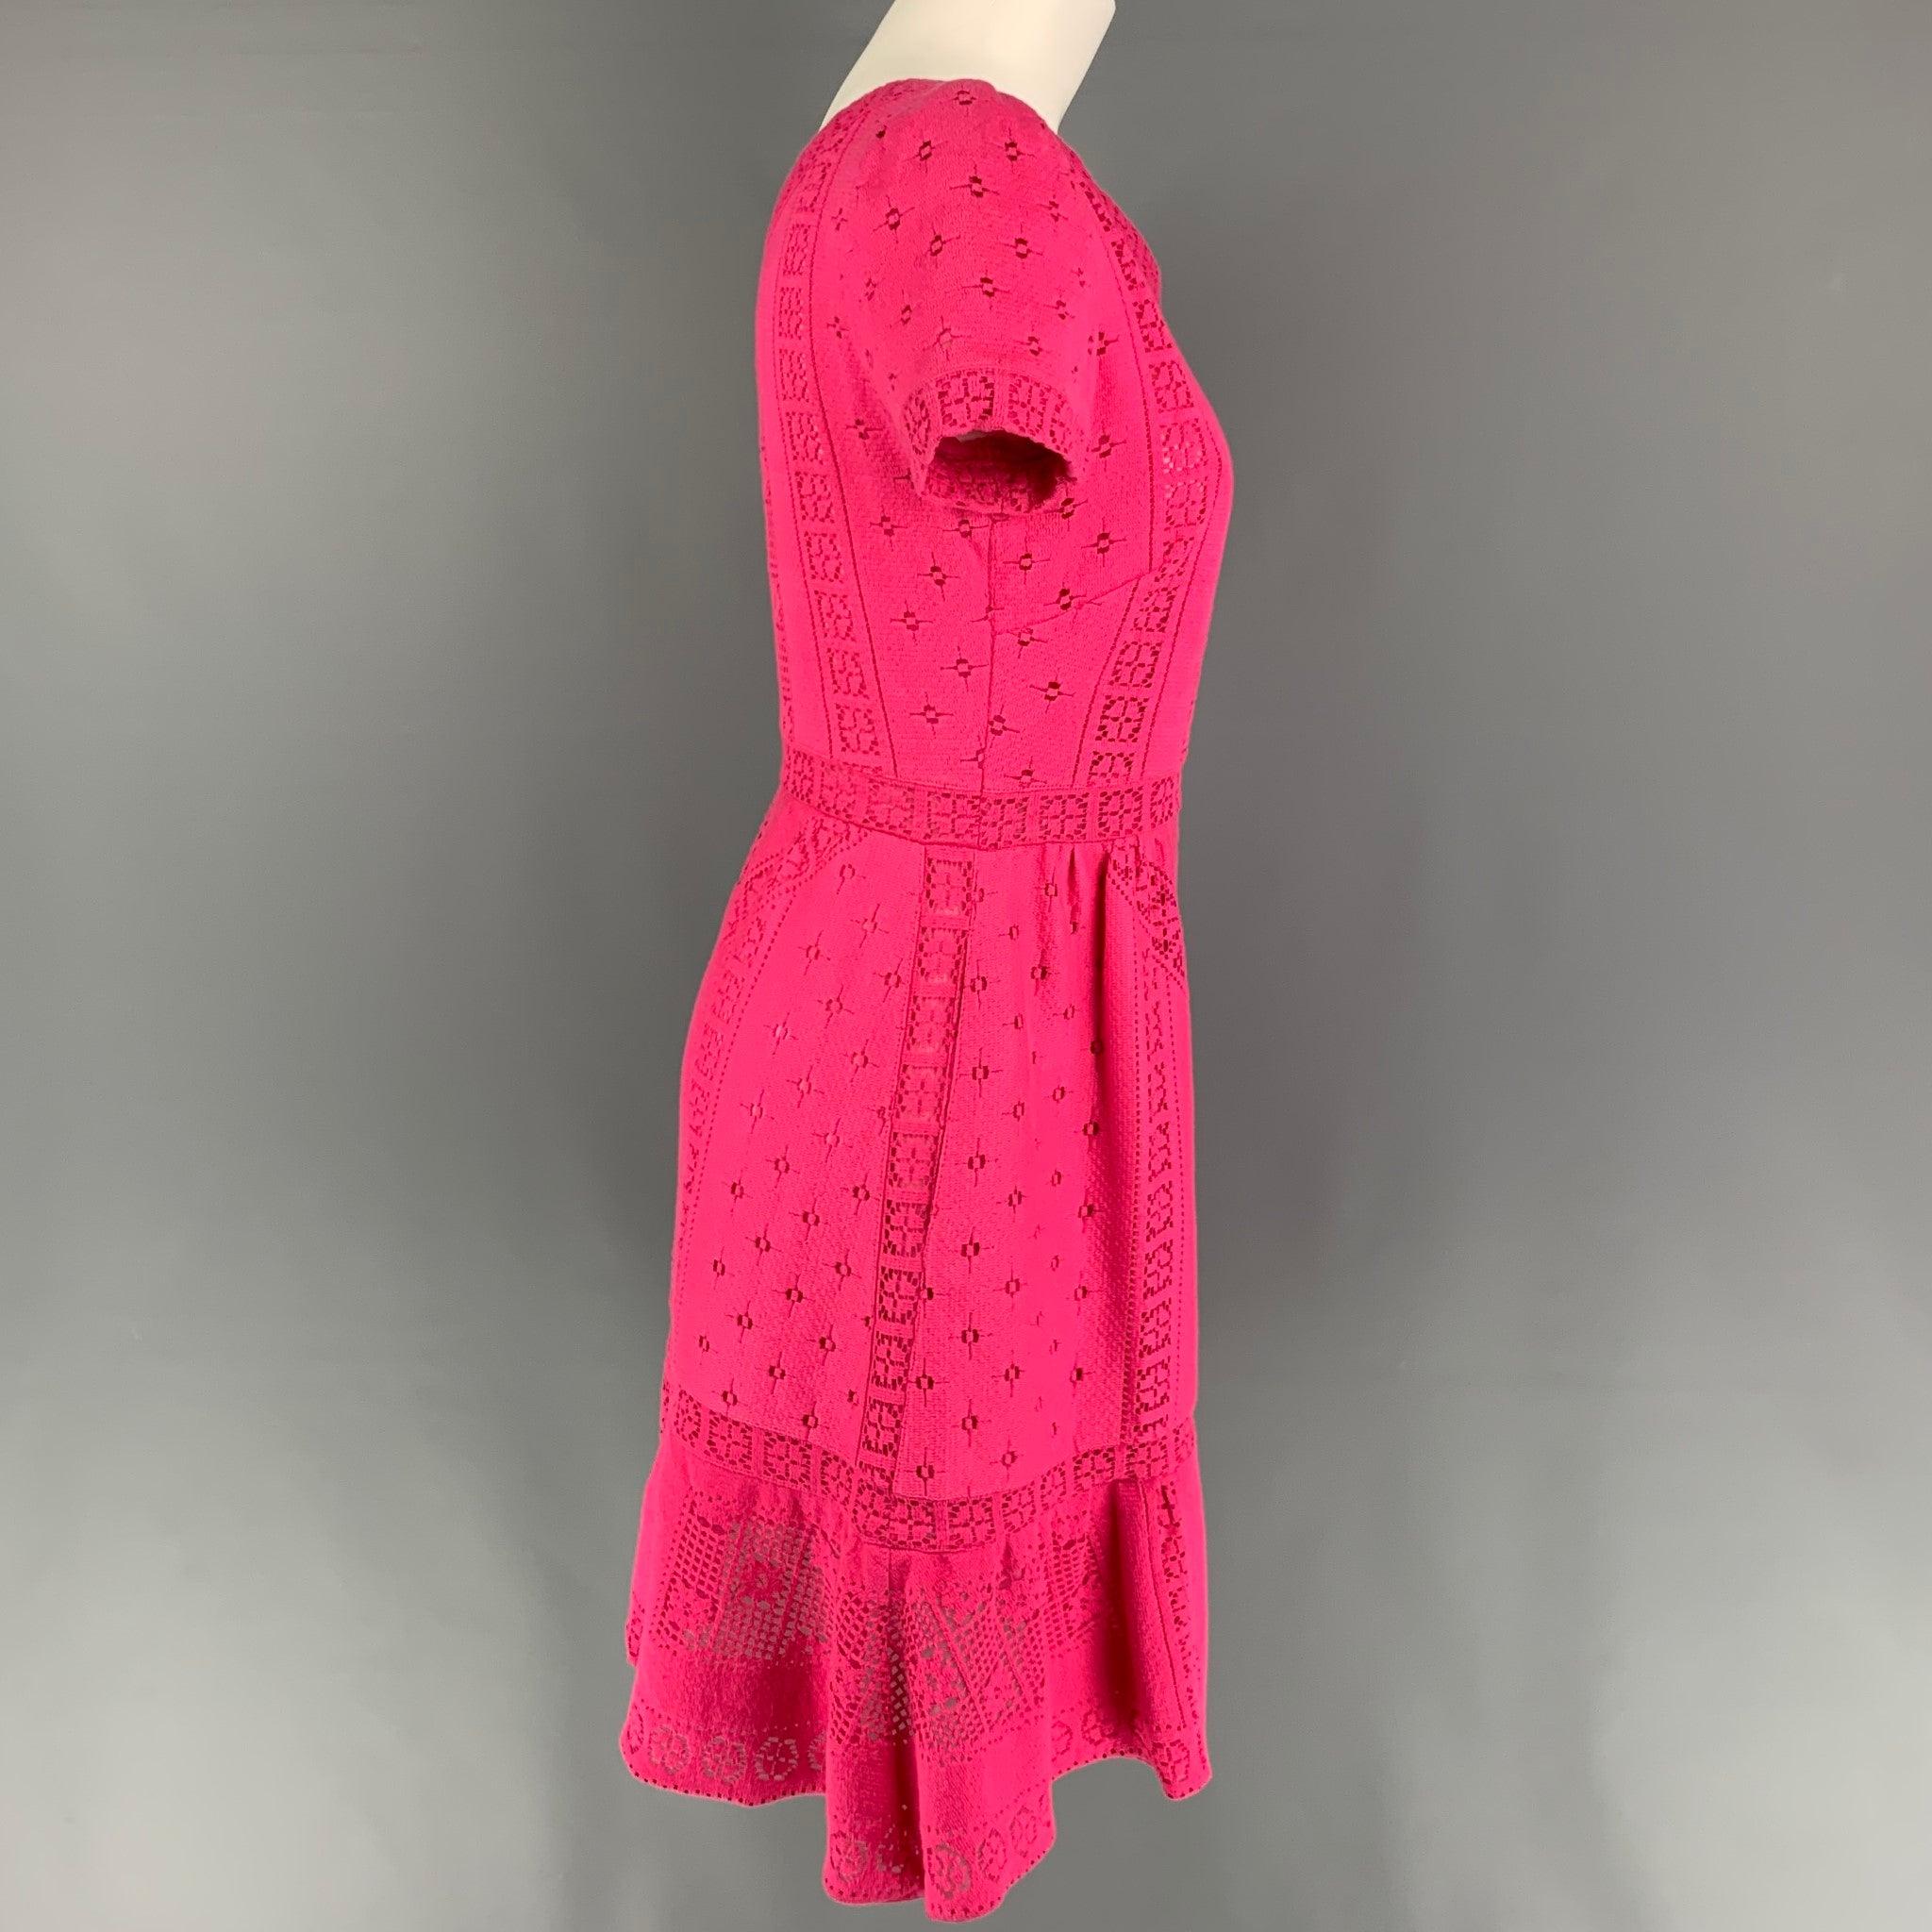 VALENTINO dress comes in a pink lace cotton / nylon with a slip liner featuring an a-line style, short sleeves, slit pockets, v-neck, and a side zipper closure. Made in Italy.
Very Good
Pre-Owned Condition. 

Marked:   4 

Measurements: 
 
Shoulder: